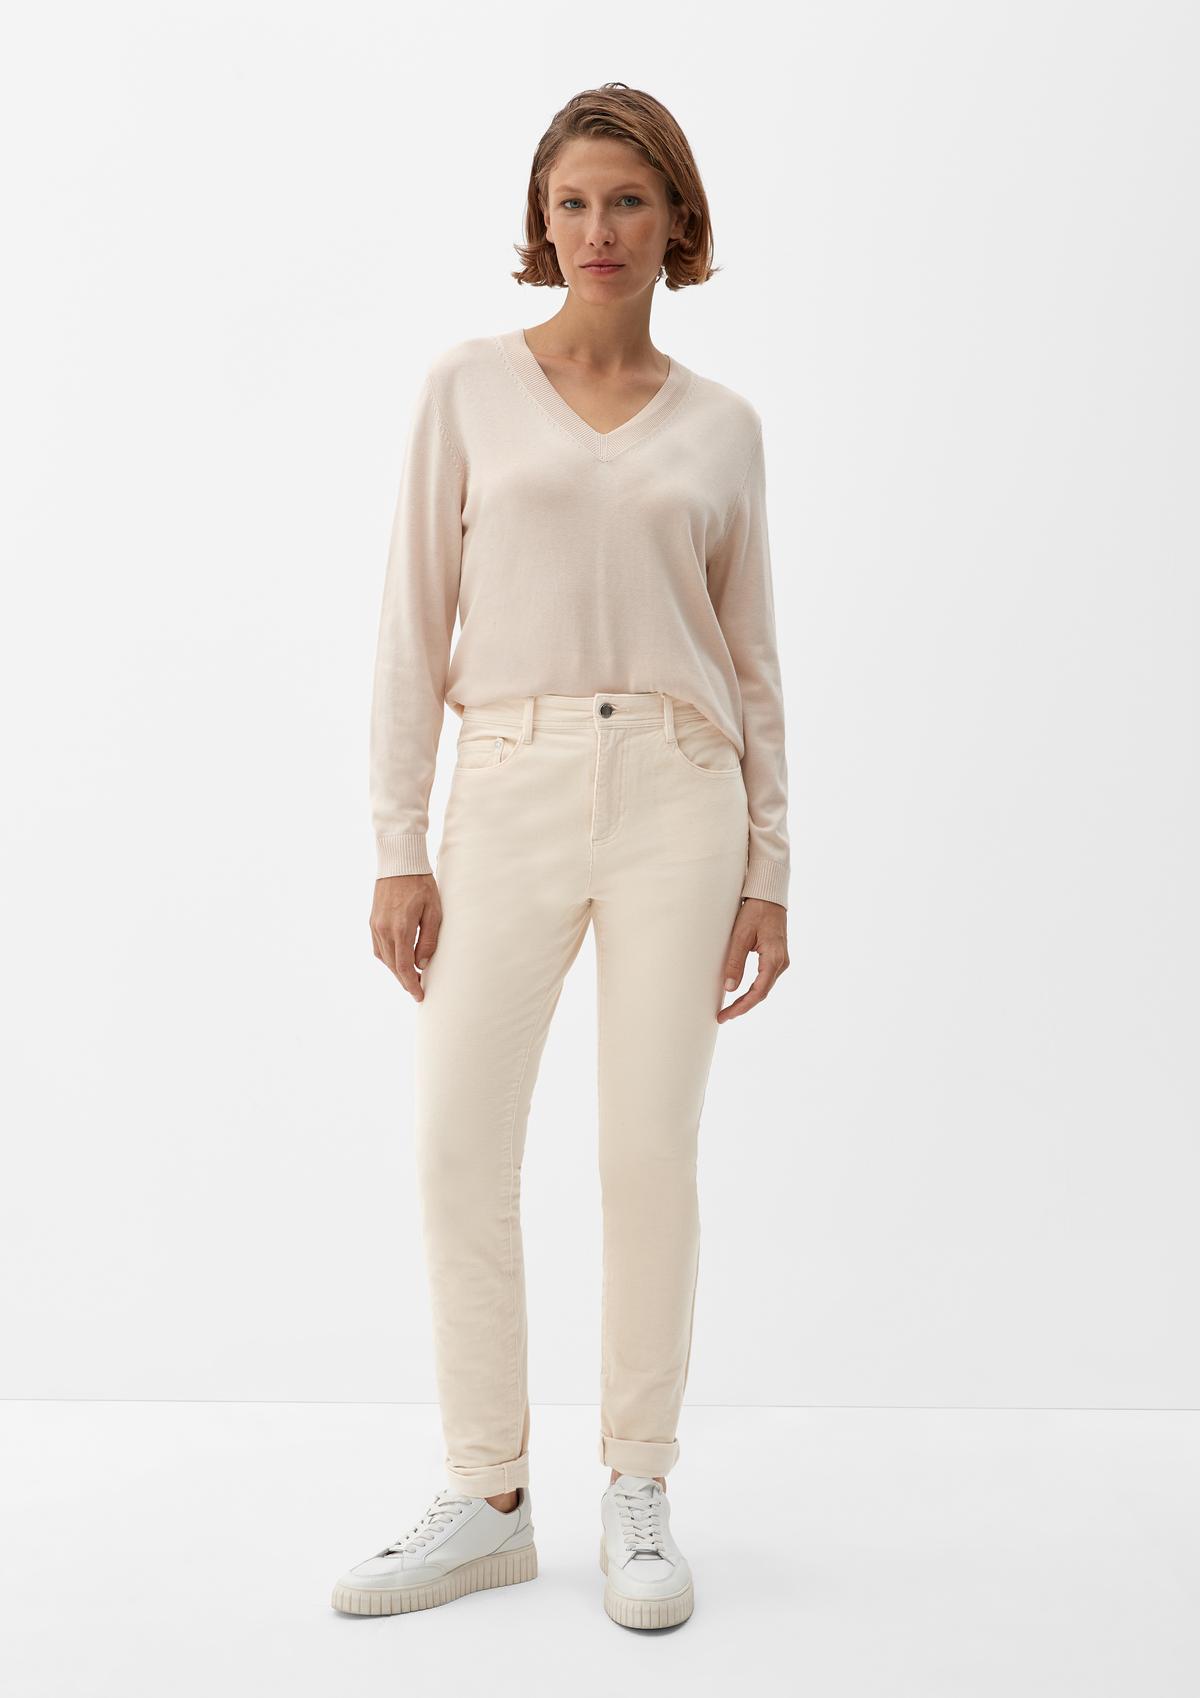 s.Oliver Slim fit: needlecord trousers